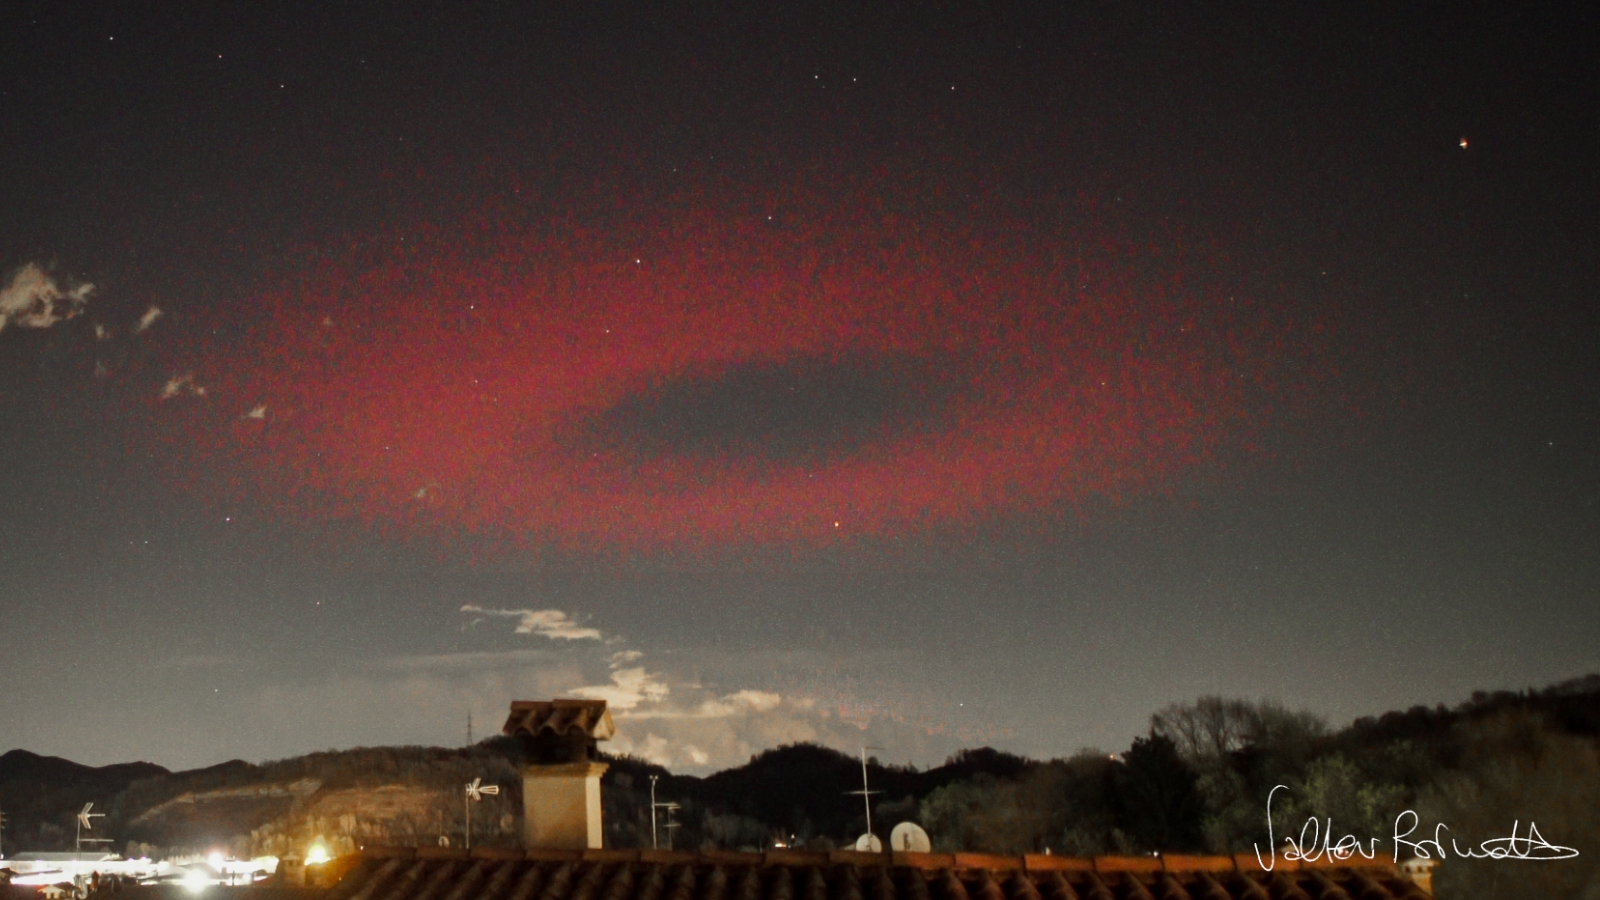 10 bizarre phenomena that lit up the sky (and their scientific